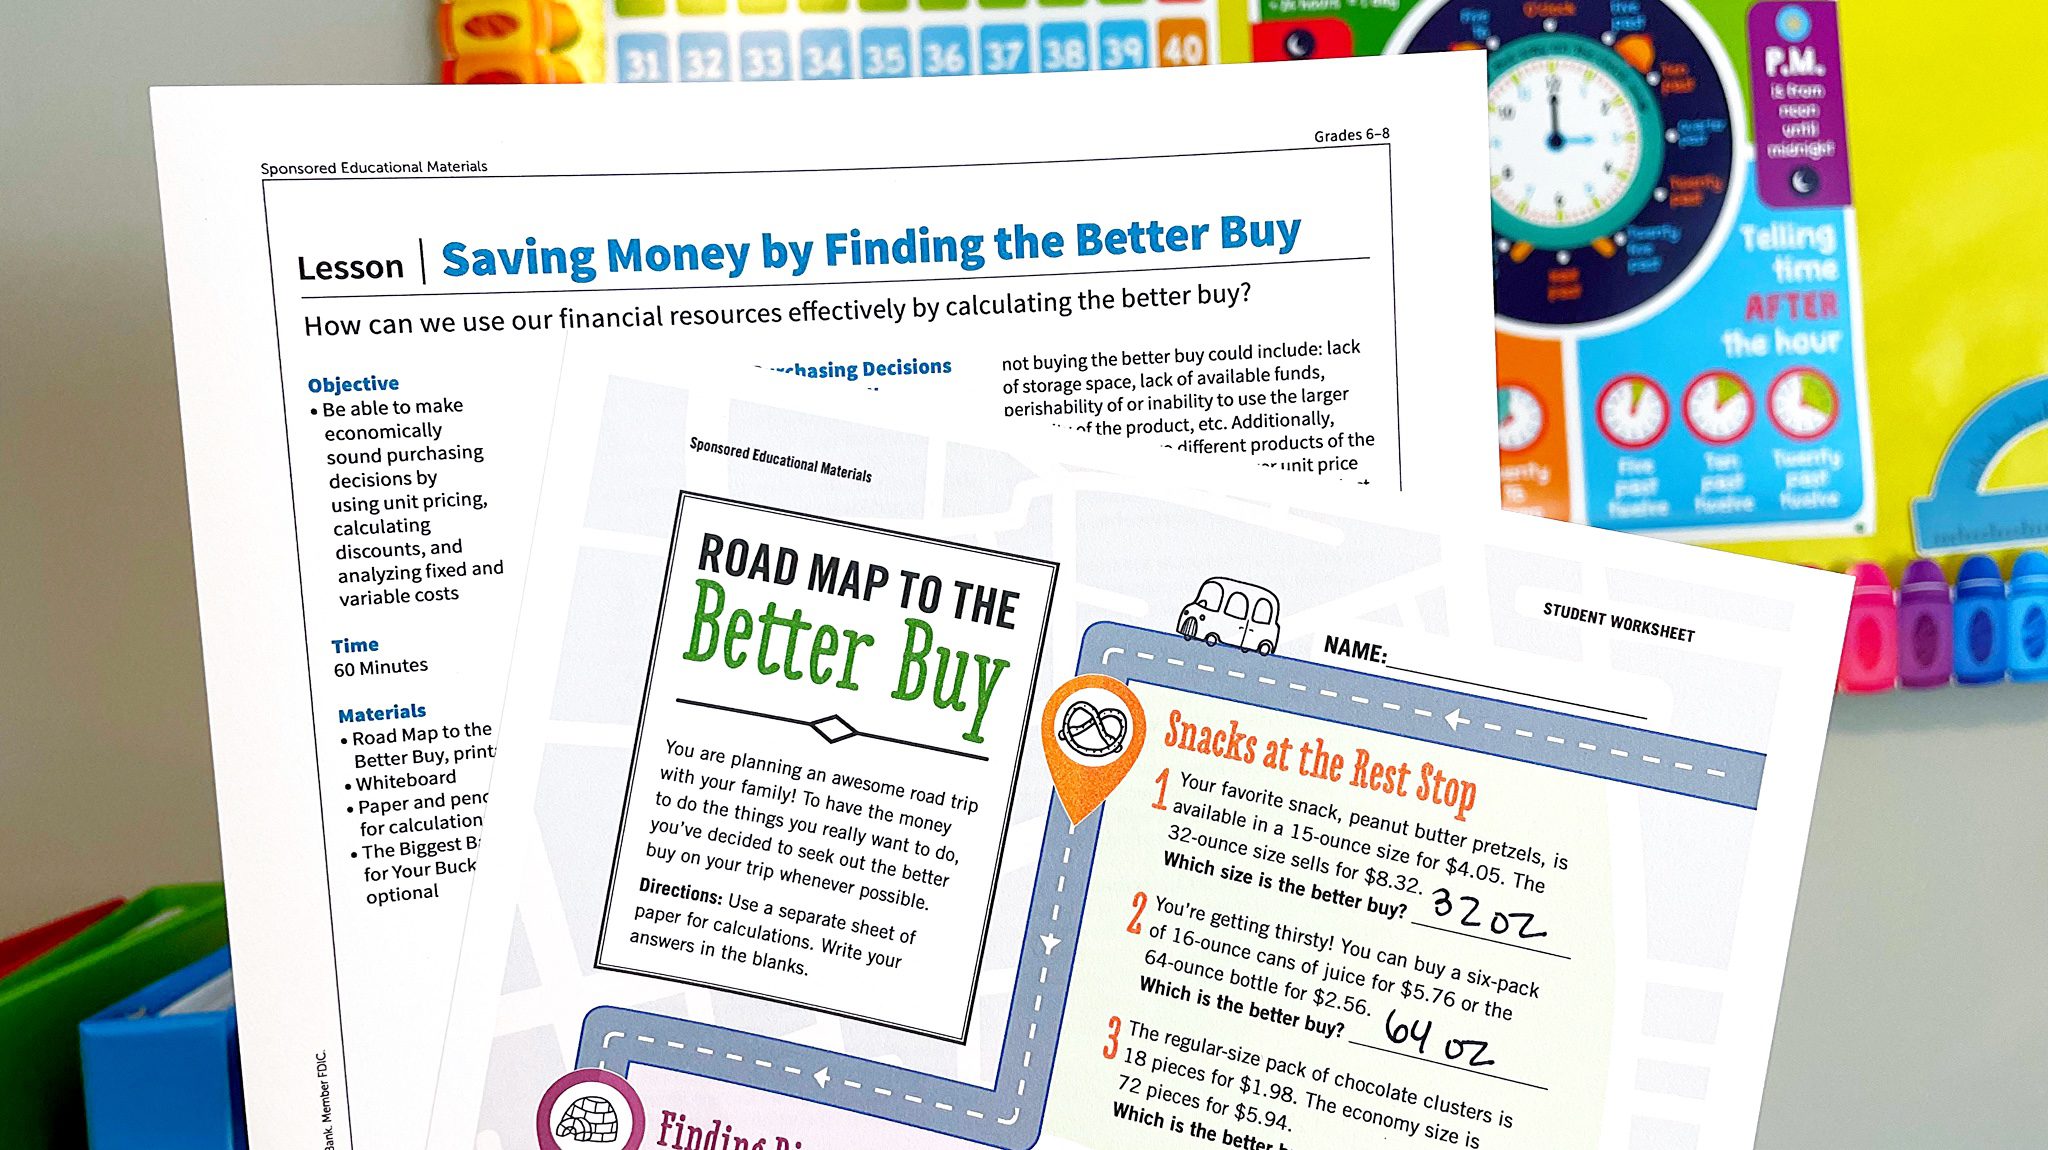 (opens in a new tab) Flat lay of 'Finding the Better Buy' lesson